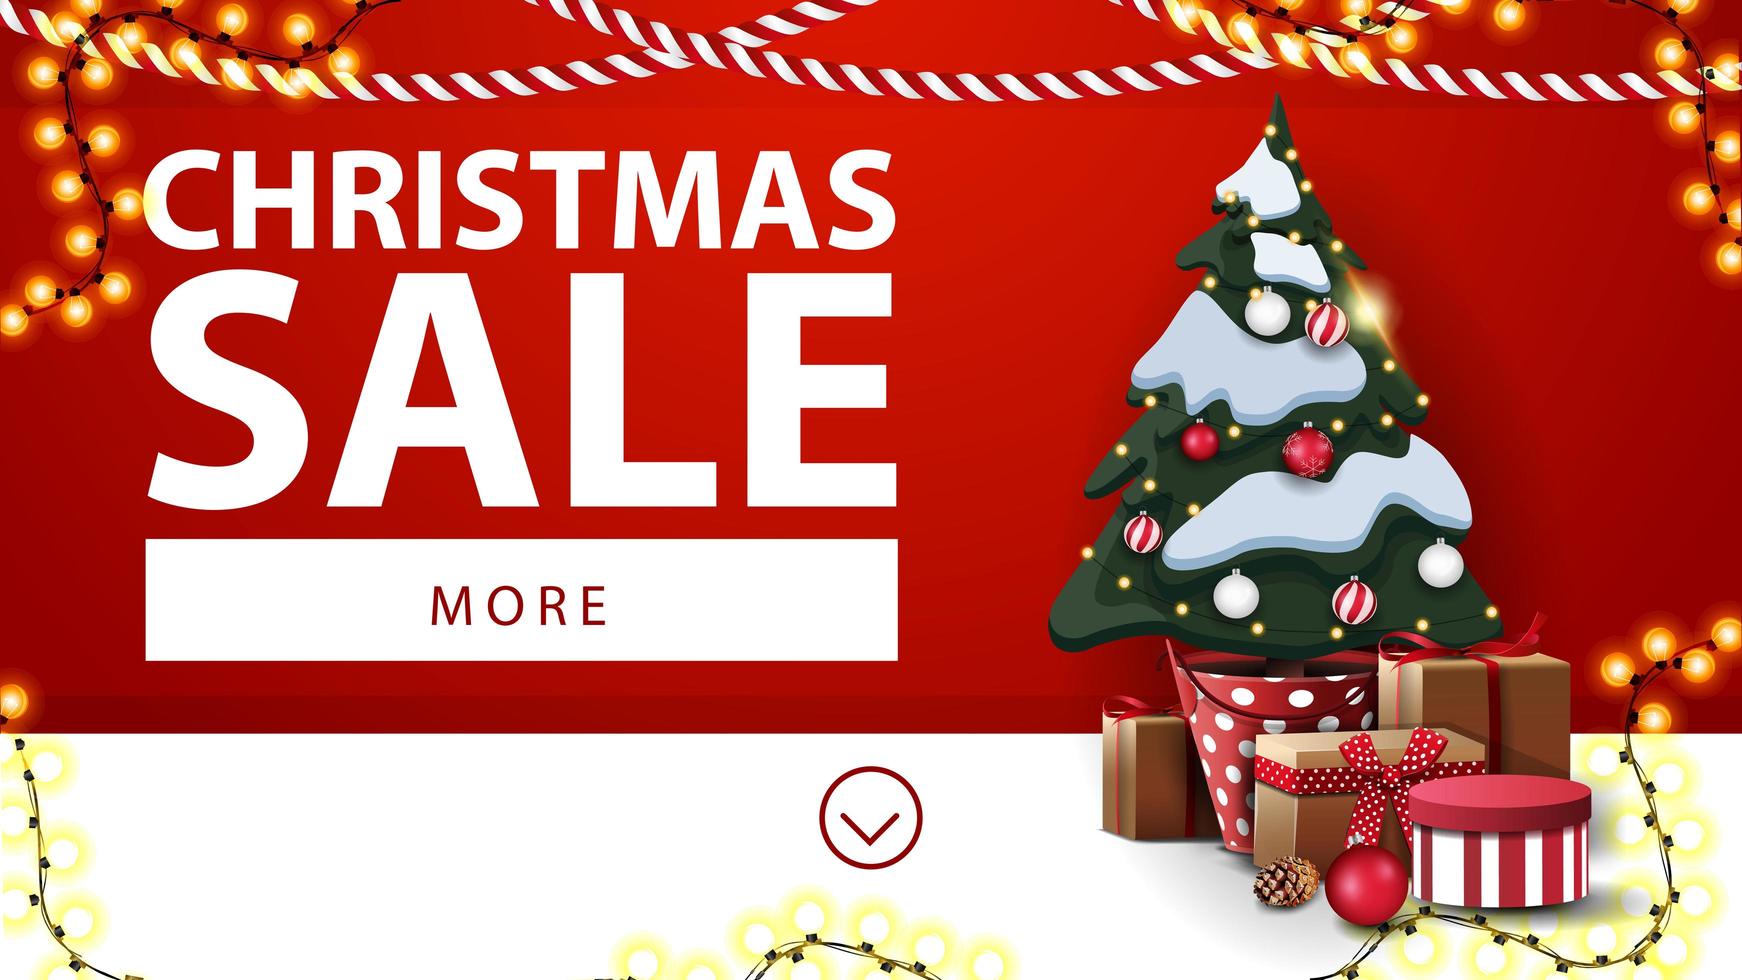 Christmas sale, red and white discount banner with garlands and Christmas tree in a pot with gifts near the wall vector